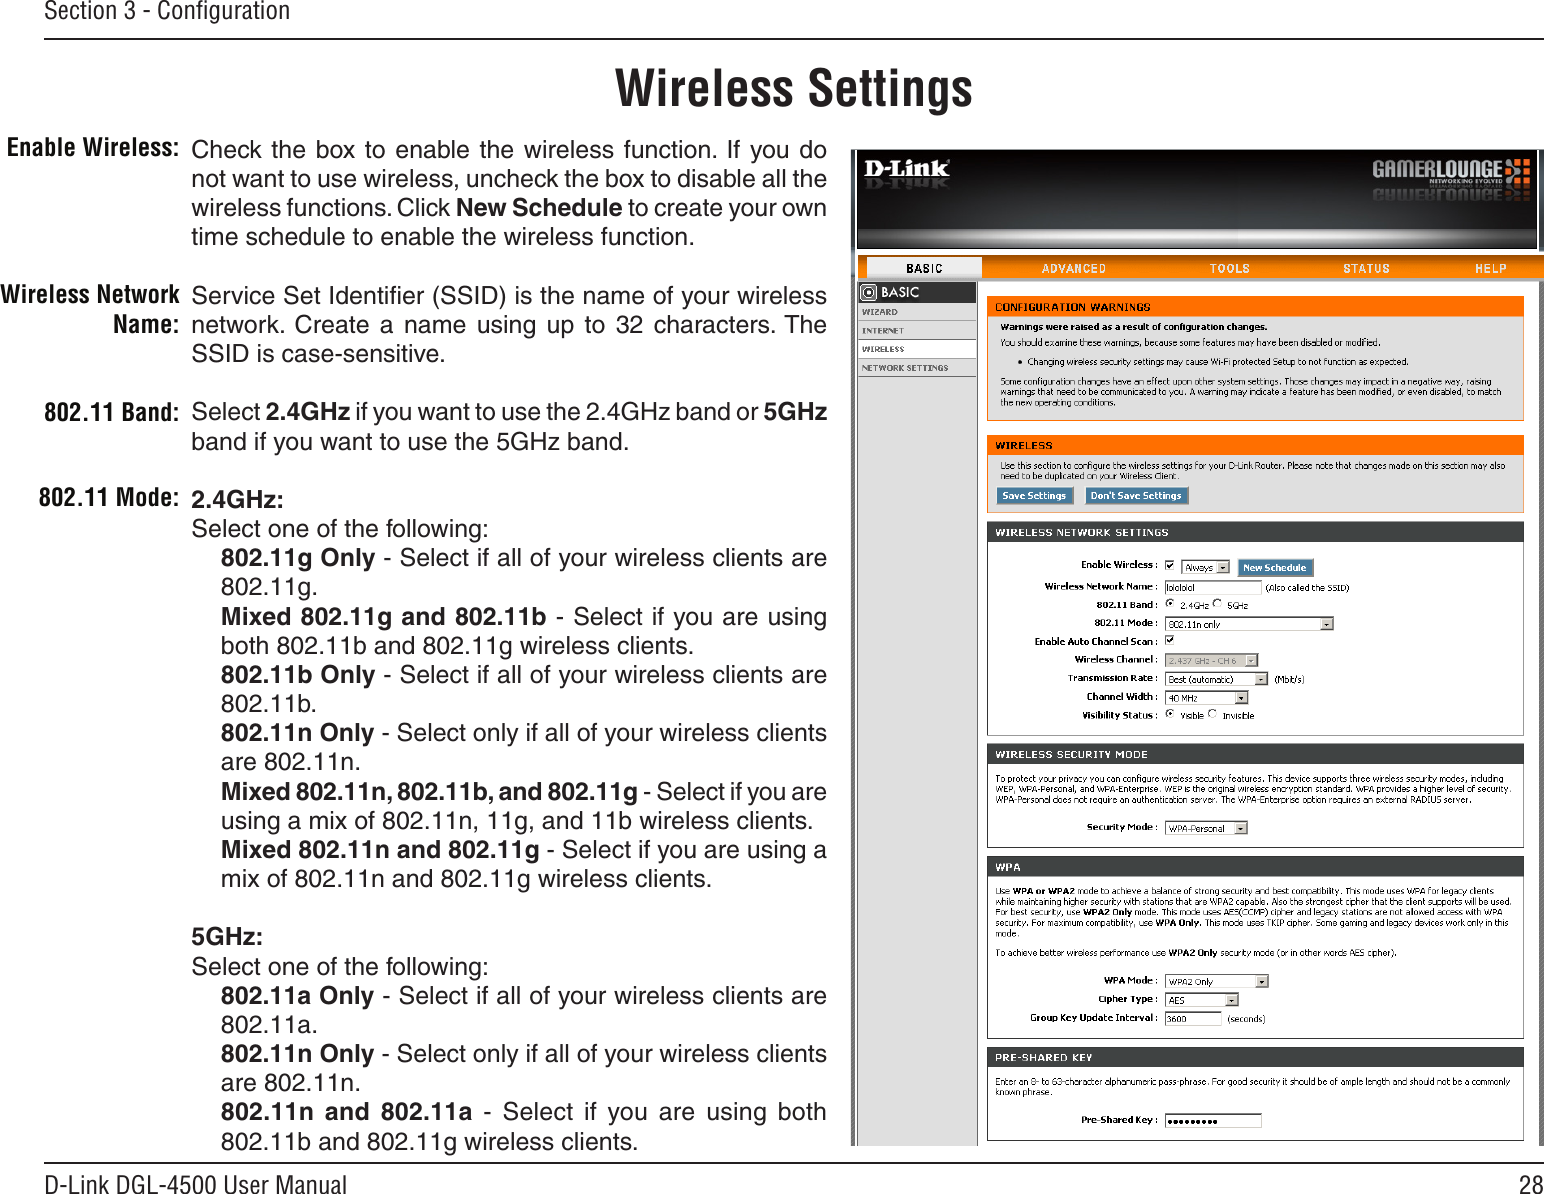 28D-Link DGL-4500 User ManualSection 3 - ConﬁgurationCheck the box to  enable the wireless function.  If  you do not want to use wireless, uncheck the box to disable all the wireless functions. Click New Schedule to create your own time schedule to enable the wireless function. Service Set Identiﬁer (SSID) is the name of your wireless network.  Create  a  name  using  up  to  32  characters. The SSID is case-sensitive.Select 2.4GHz if you want to use the 2.4GHz band or 5GHz band if you want to use the 5GHz band. 2.4GHz:Select one of the following:802.11g Only - Select if all of your wireless clients are 802.11g.Mixed 802.11g and 802.11b - Select if you are using both 802.11b and 802.11g wireless clients.802.11b Only - Select if all of your wireless clients are 802.11b.802.11n Only - Select only if all of your wireless clients are 802.11n.Mixed 802.11n, 802.11b, and 802.11g - Select if you are using a mix of 802.11n, 11g, and 11b wireless clients.Mixed 802.11n and 802.11g - Select if you are using a mix of 802.11n and 802.11g wireless clients.5GHz:Select one of the following:802.11a Only - Select if all of your wireless clients are 802.11a.802.11n Only - Select only if all of your wireless clients are 802.11n.802.11n  and  802.11a  -  Select  if  you  are  using  both 802.11b and 802.11g wireless clients.Enable Wireless:Wireless SettingsWireless Network Name:802.11 Mode:802.11 Band: